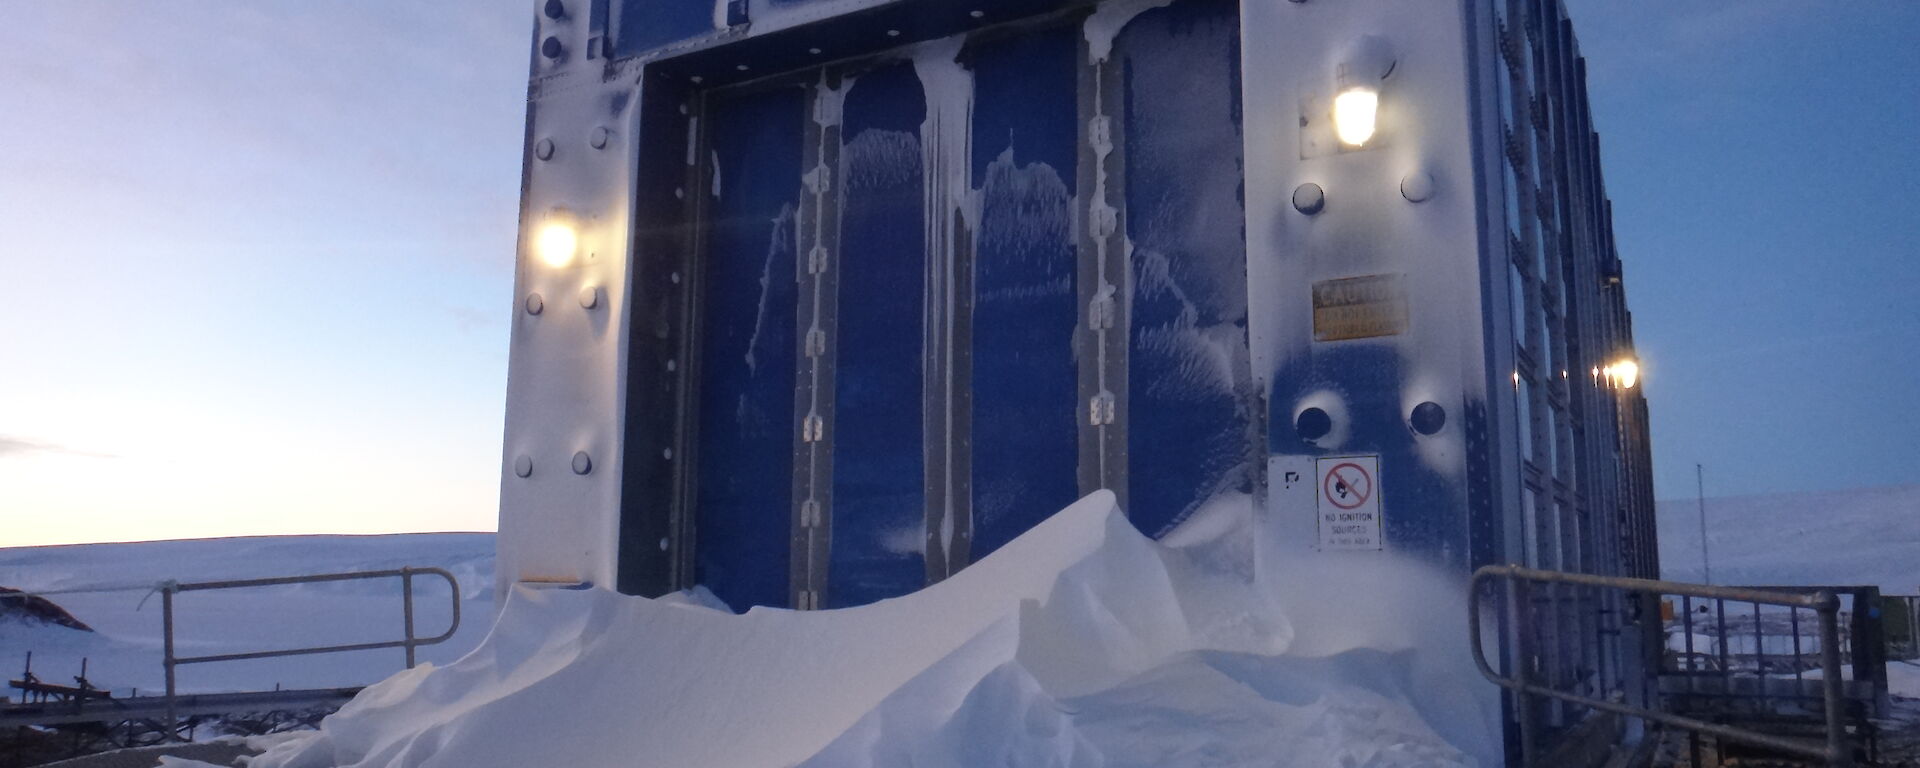 Snow blocking the entry to the Balloon Shed : Mawson Station.